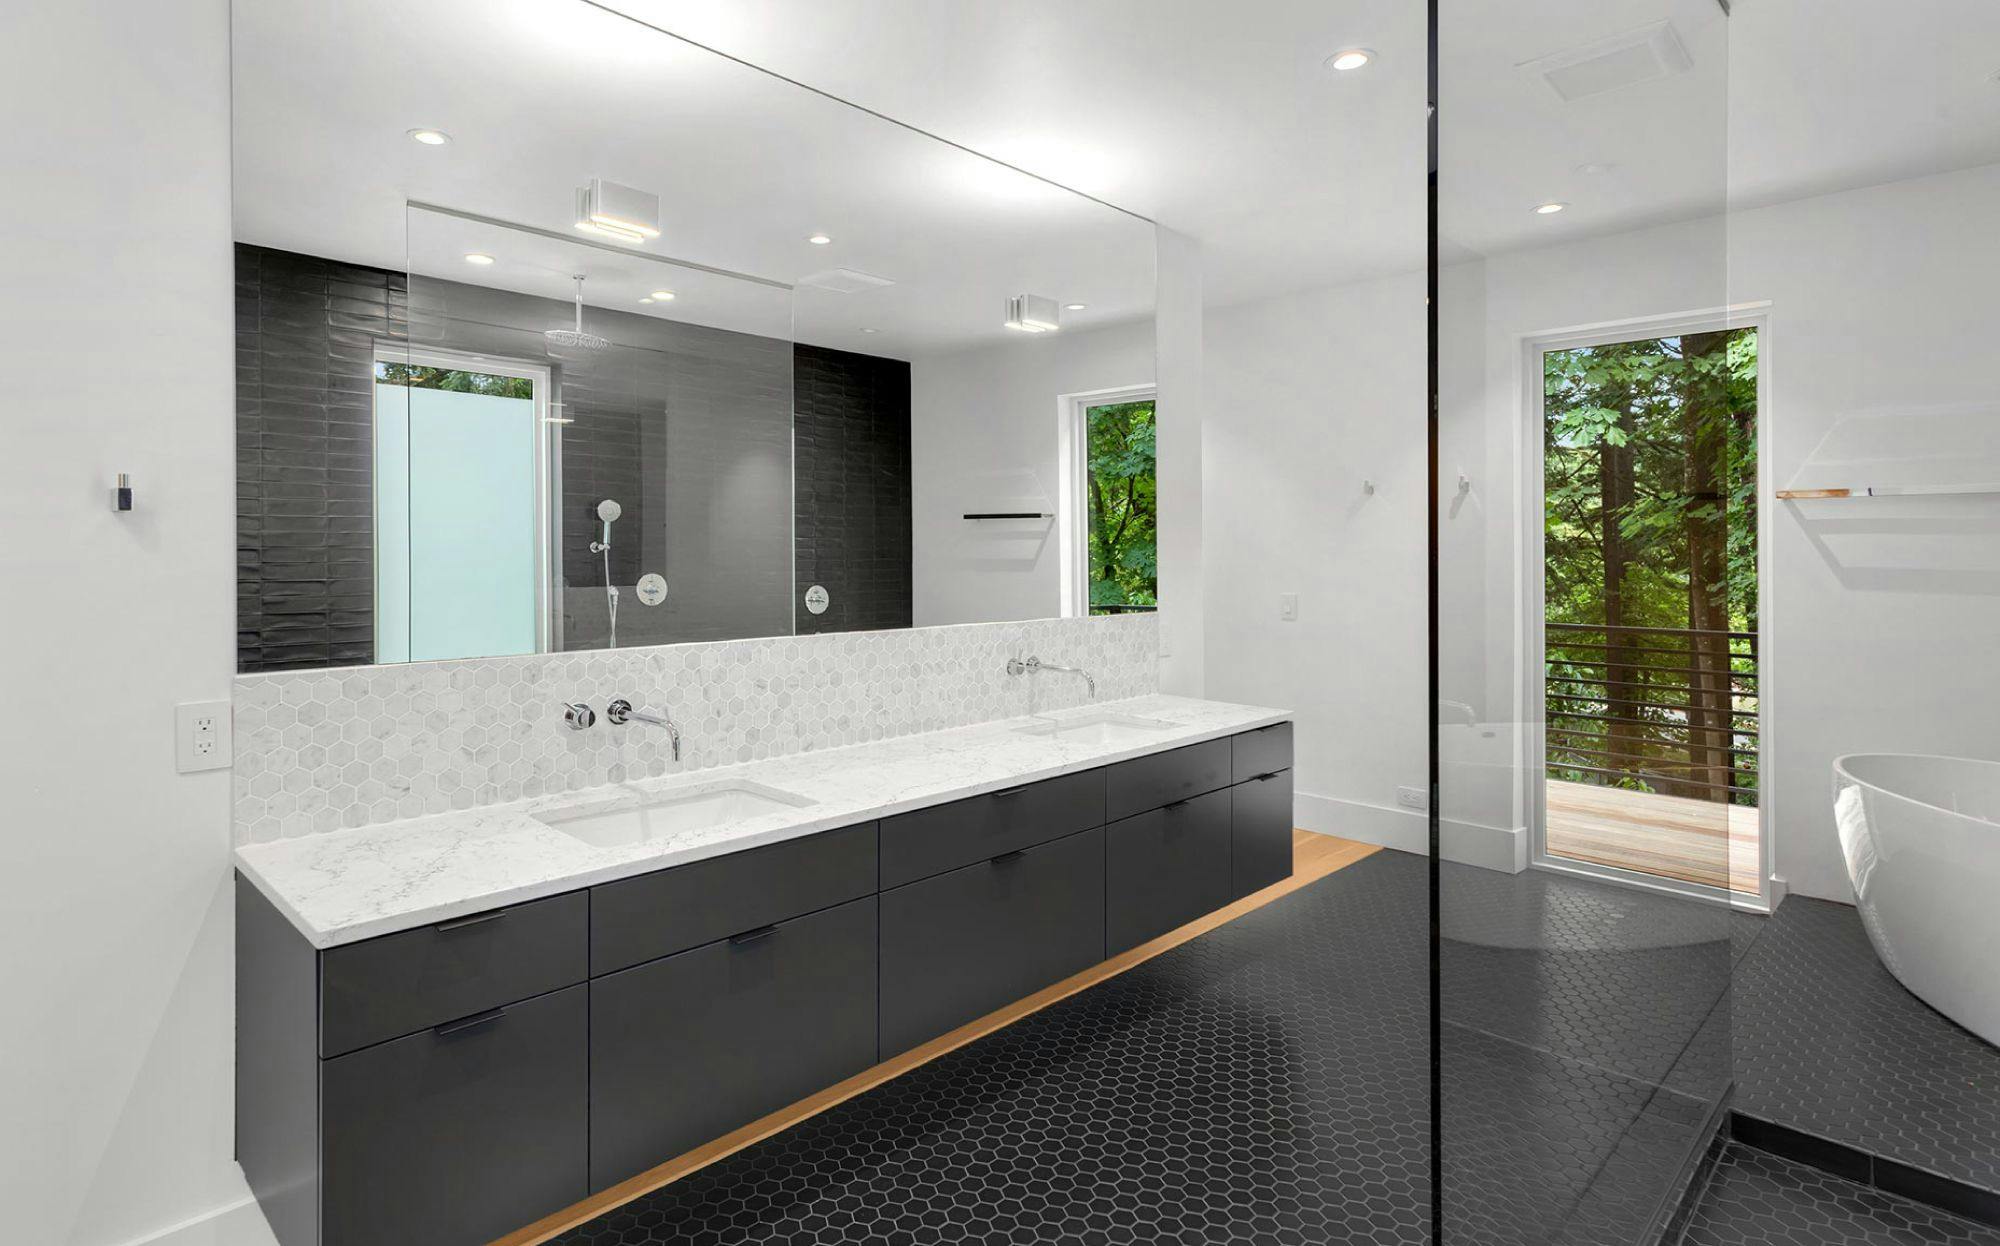 shower door and large mirror in white gray bathroom setting